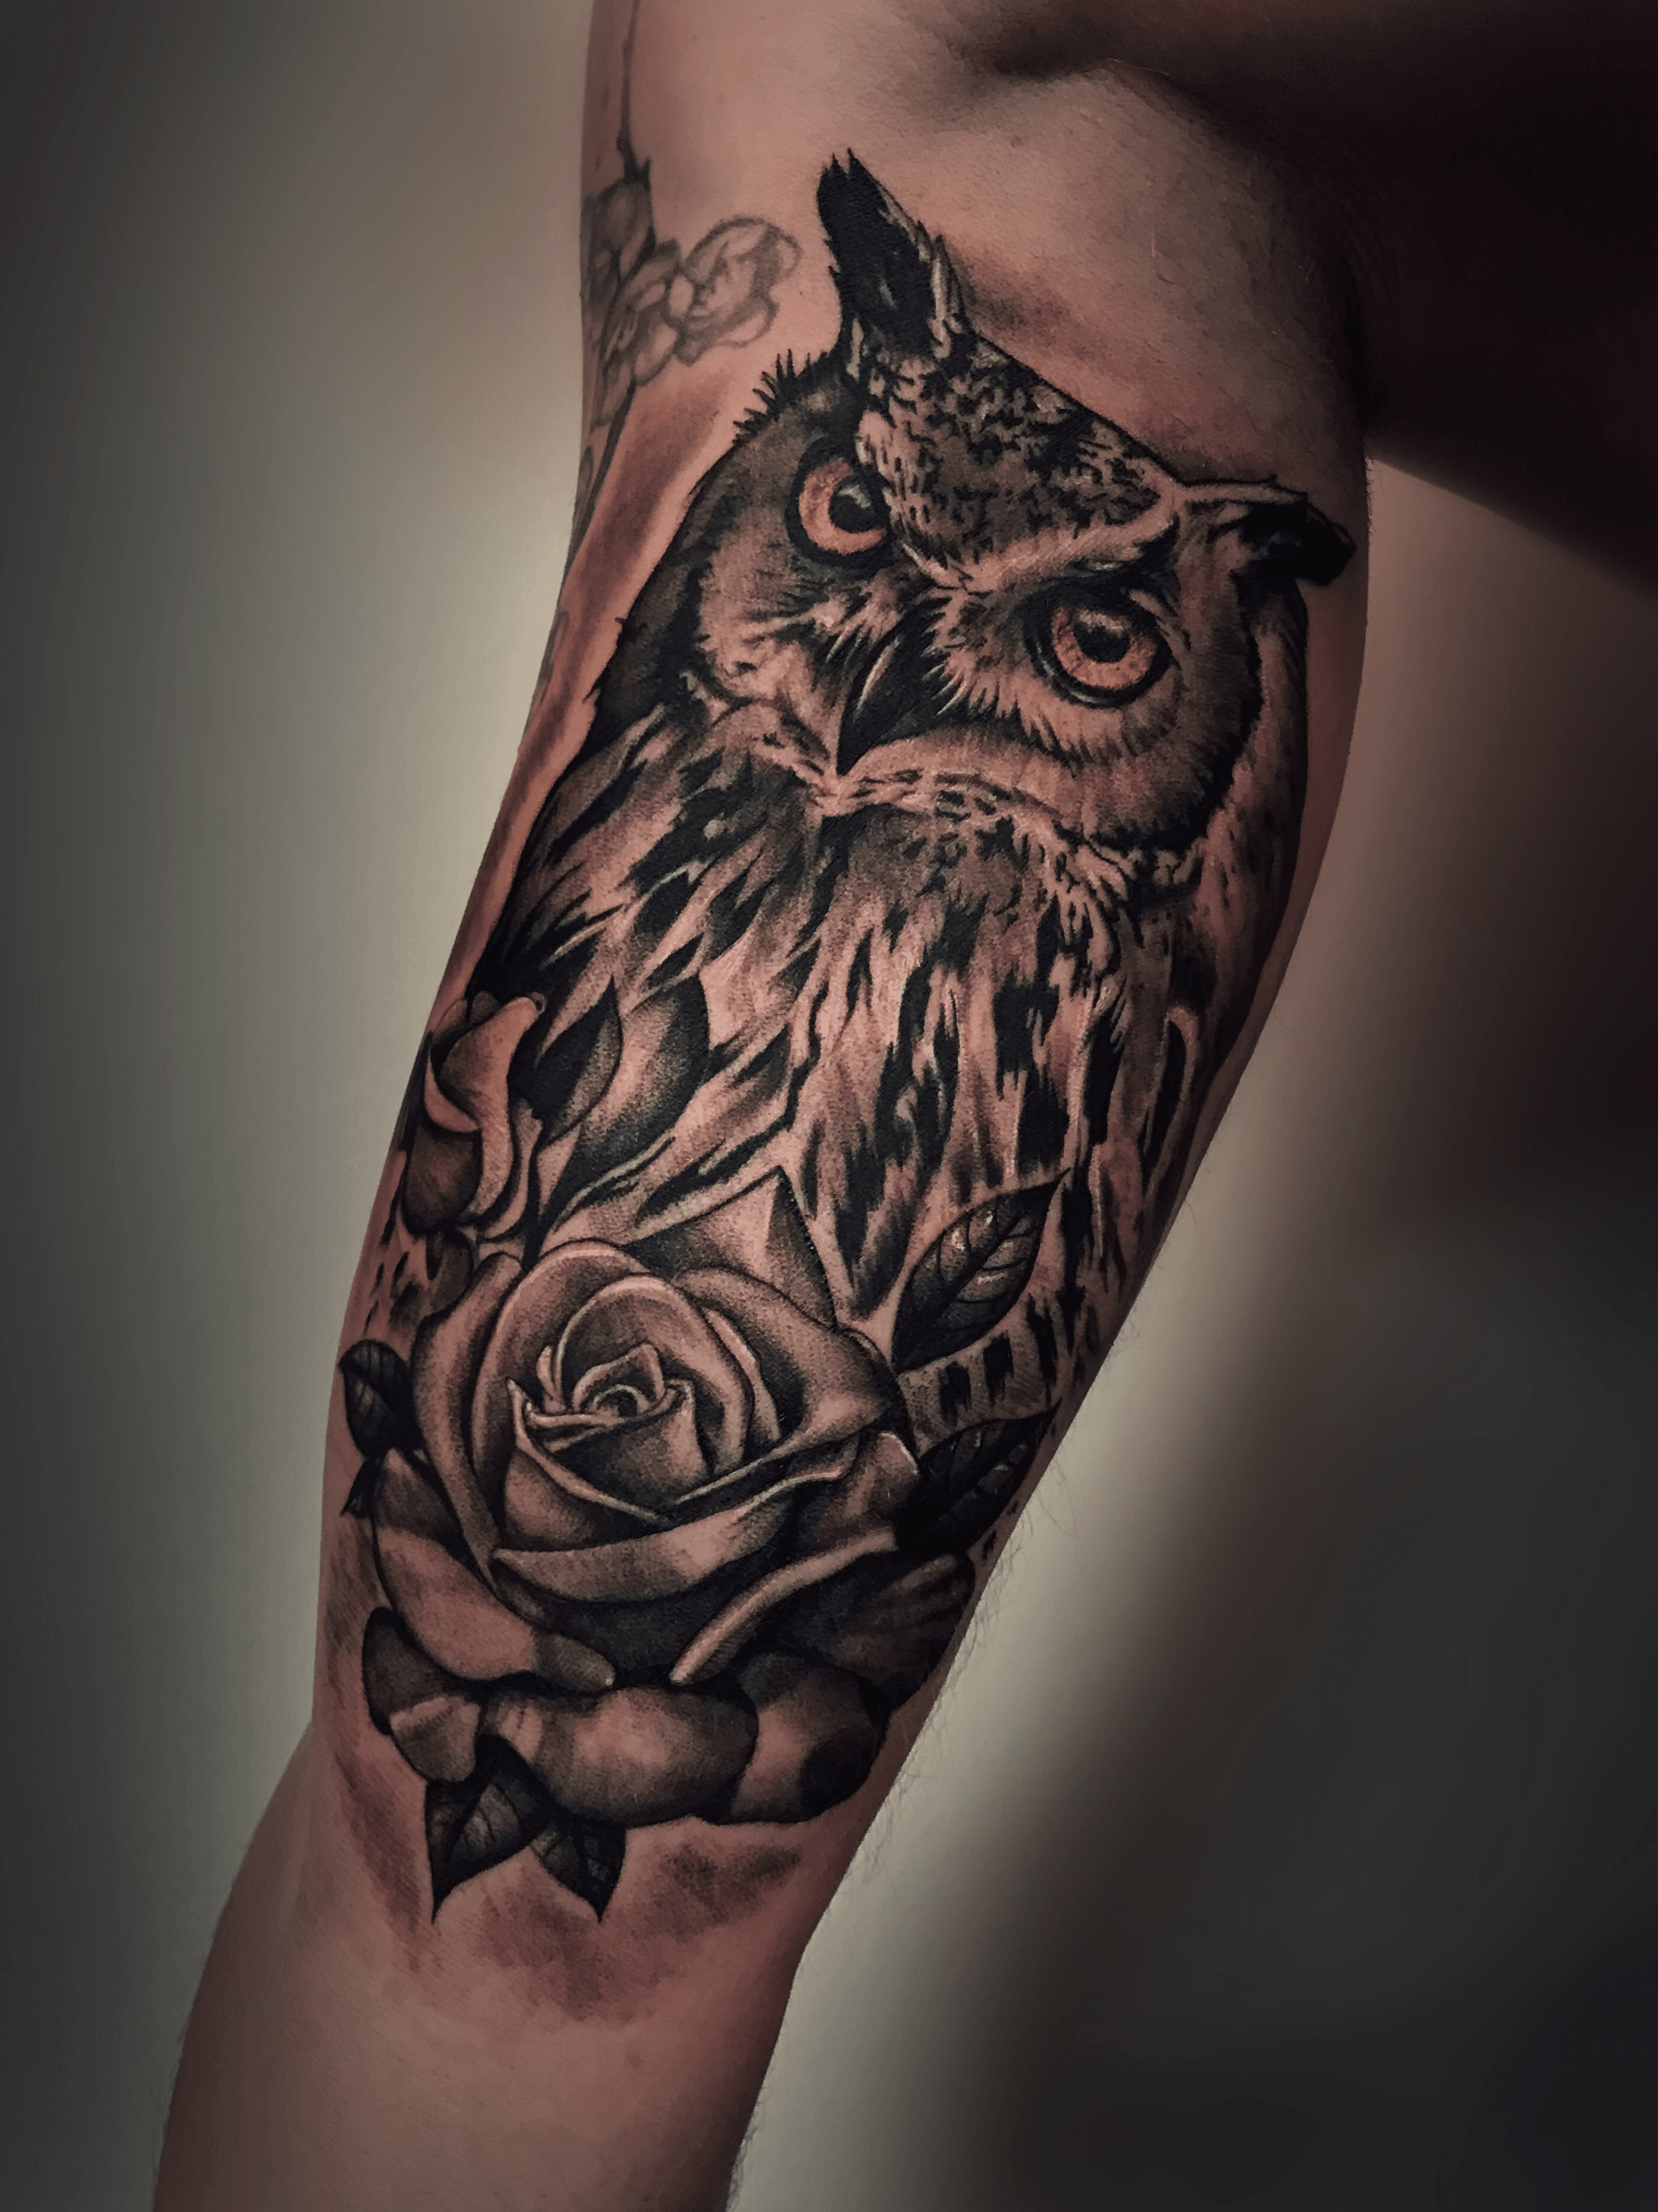 110 Best Owl Tattoos Ideas with Images